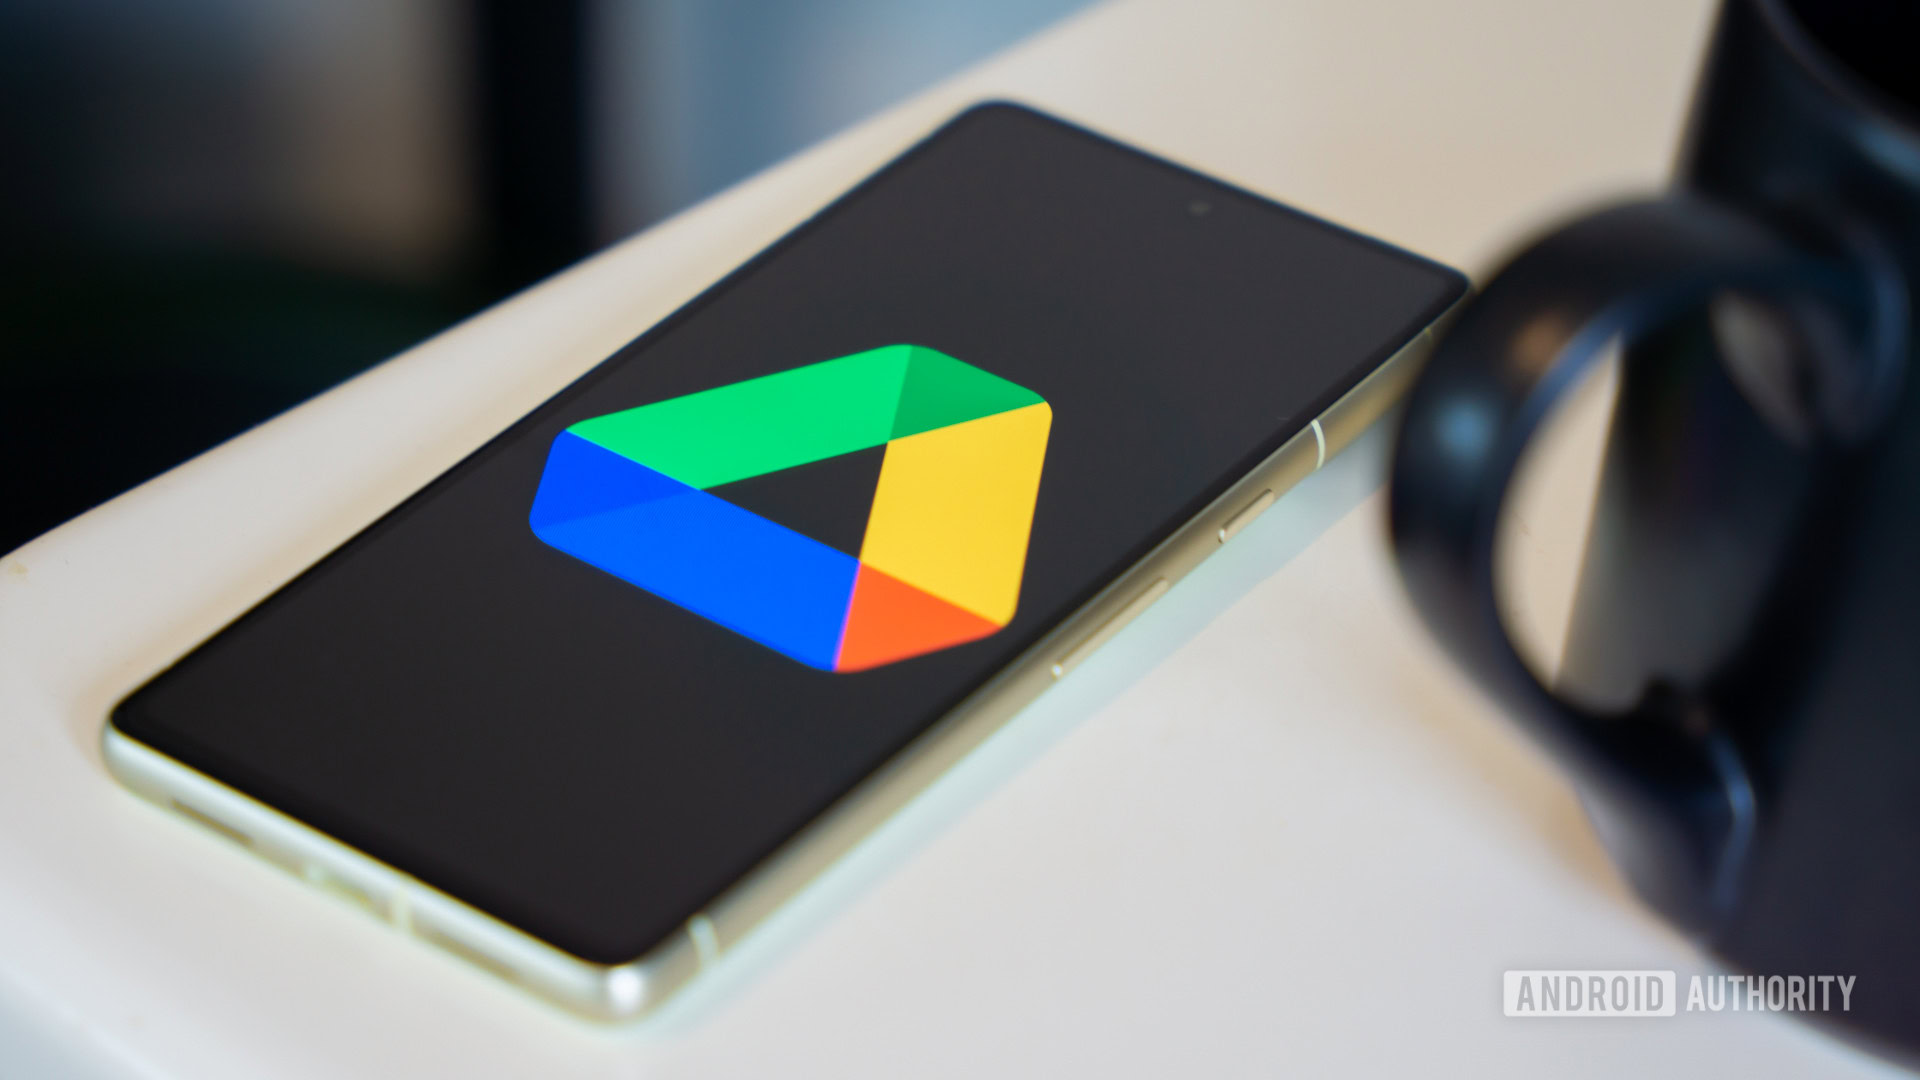 Google Drive on tablets now looks even more like the website